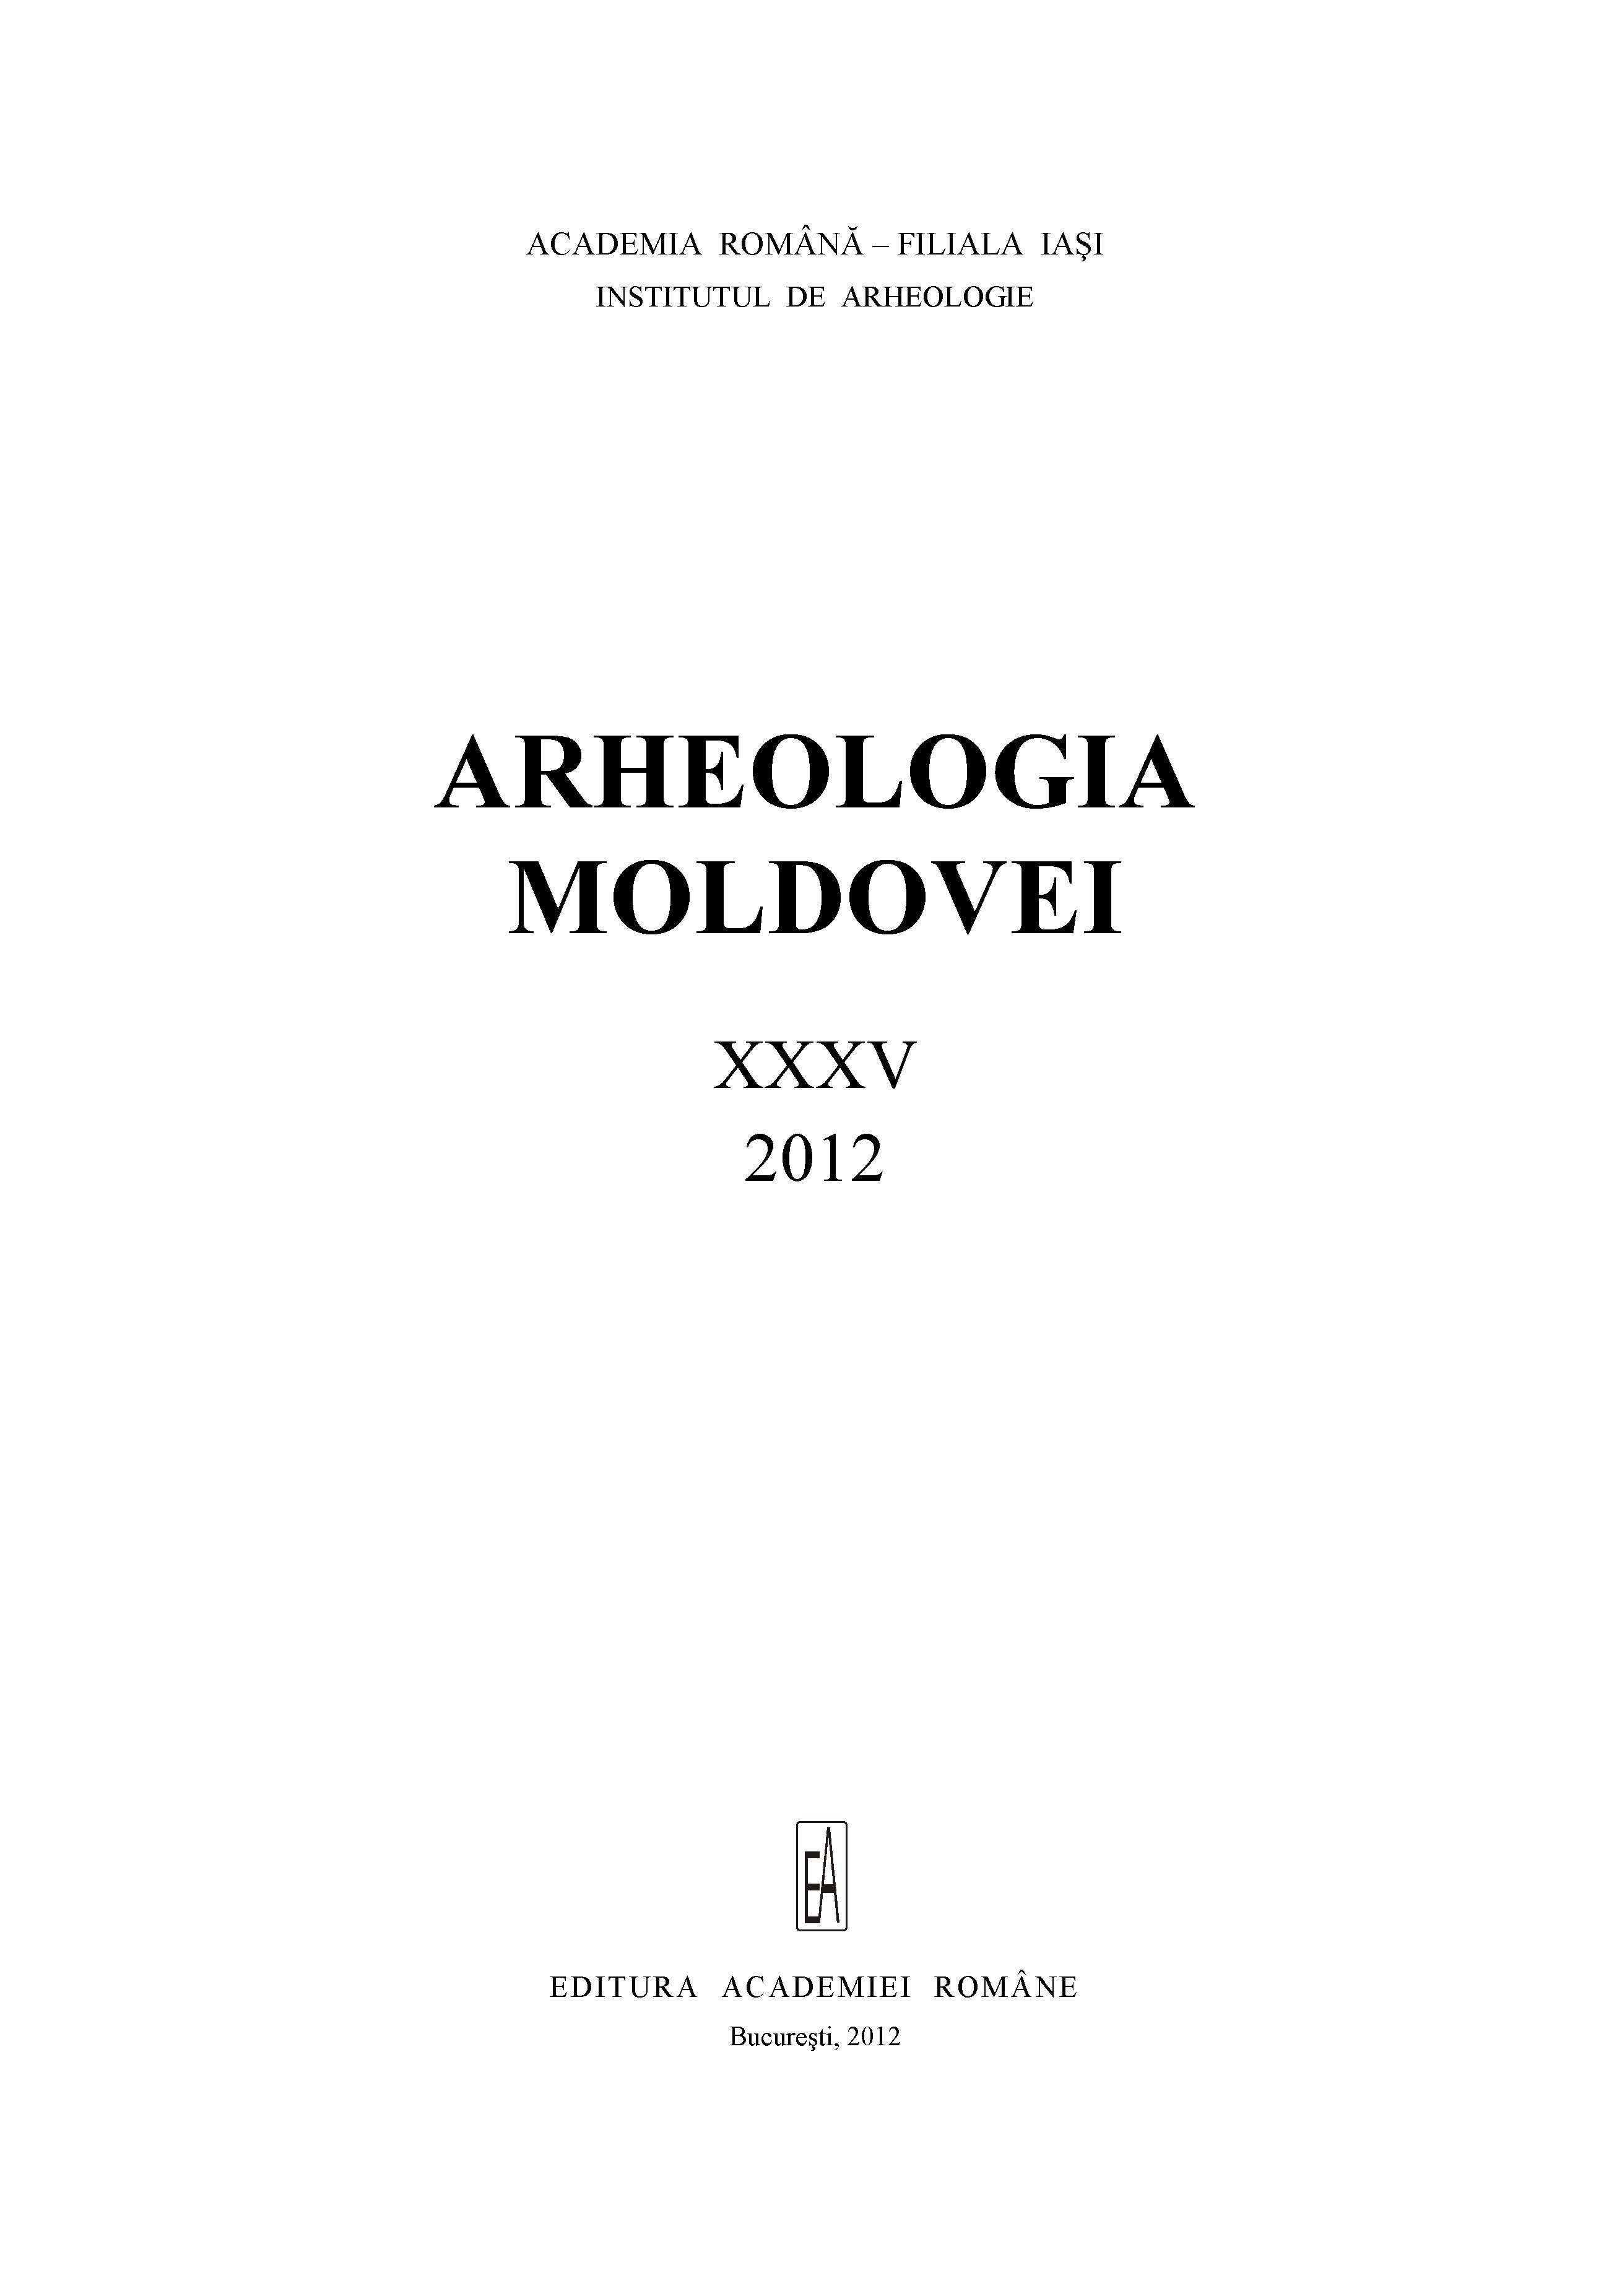 Results of the Archaeological Investigations in the Cucuteni A3 Settlement from Pocreaca, Iasi County Cover Image